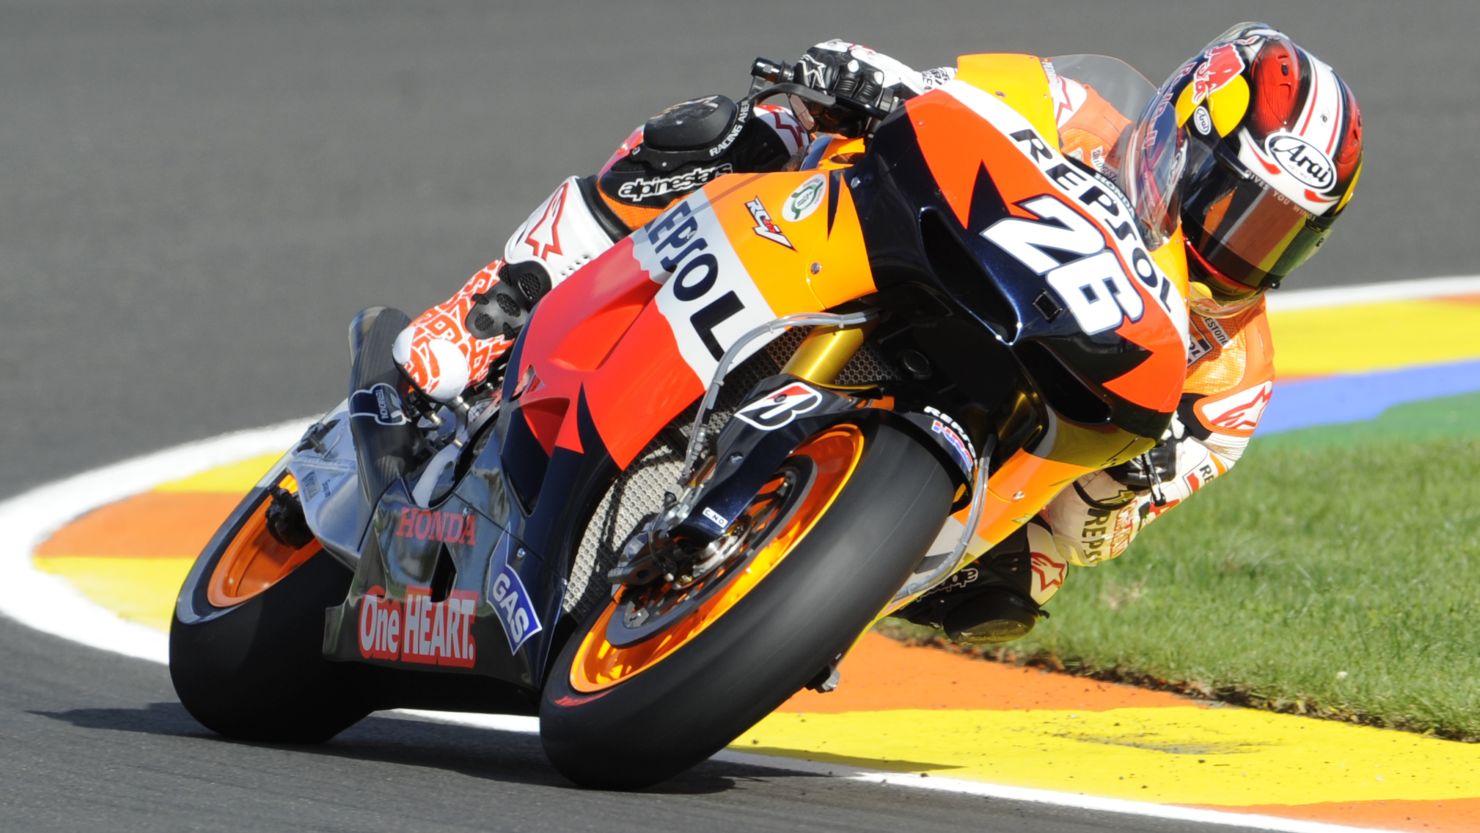 Repsol Honda rider Dani Pedrosa will start the final race of the 2012 season in pole position after topping qualifying.